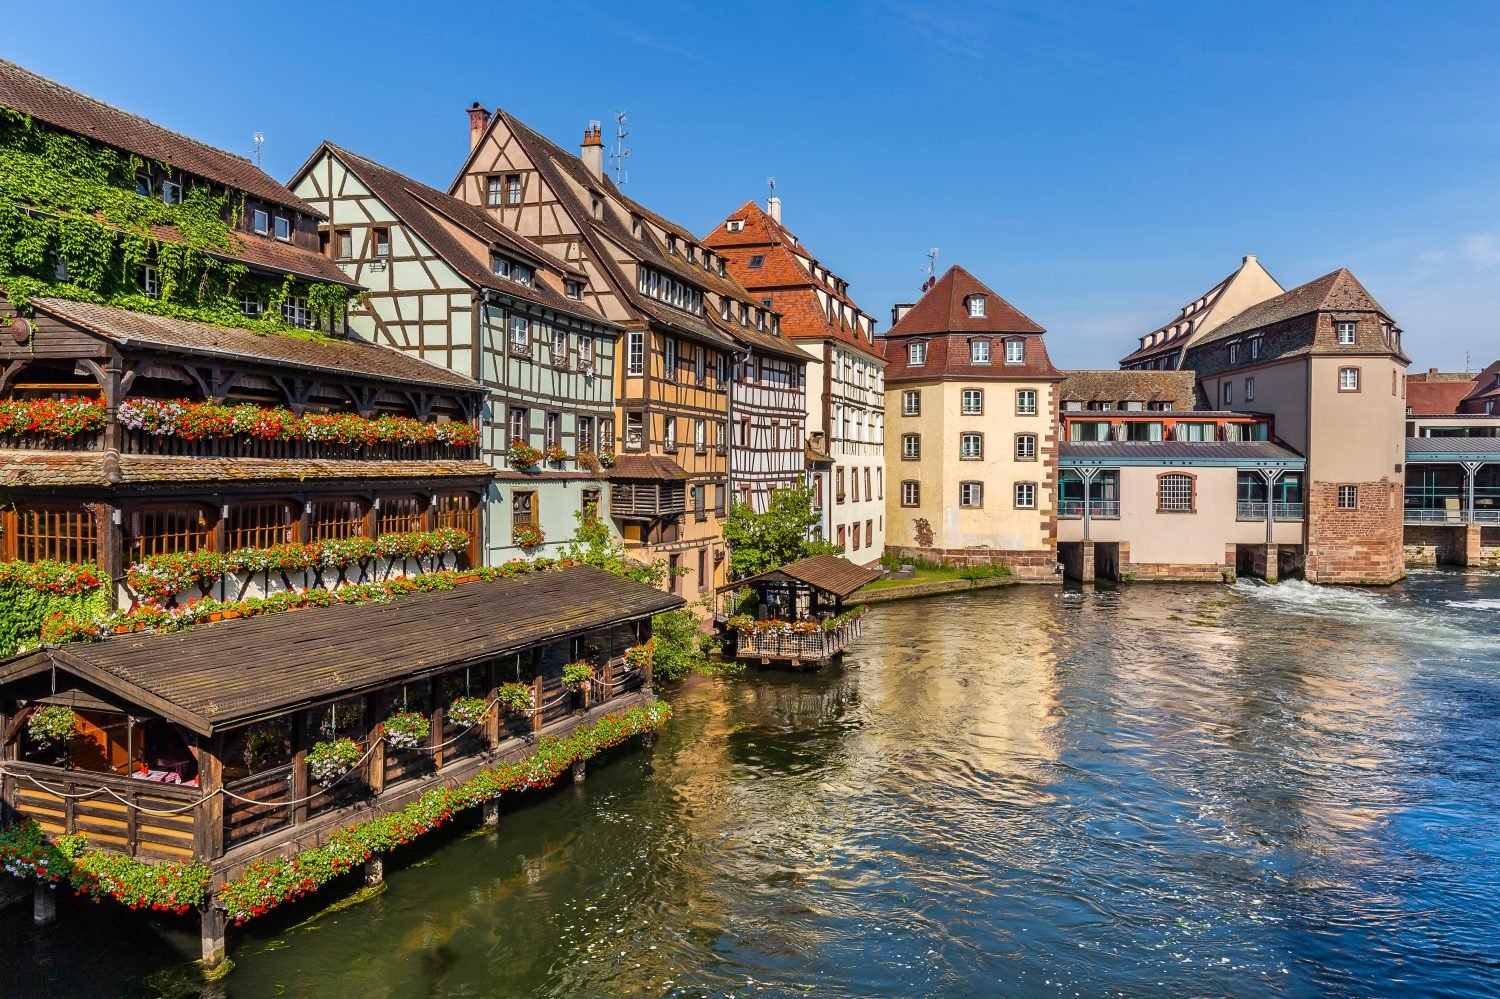 Typical half-timbered buildings and former water mills in the Petite France quarter in Strasbourg, France